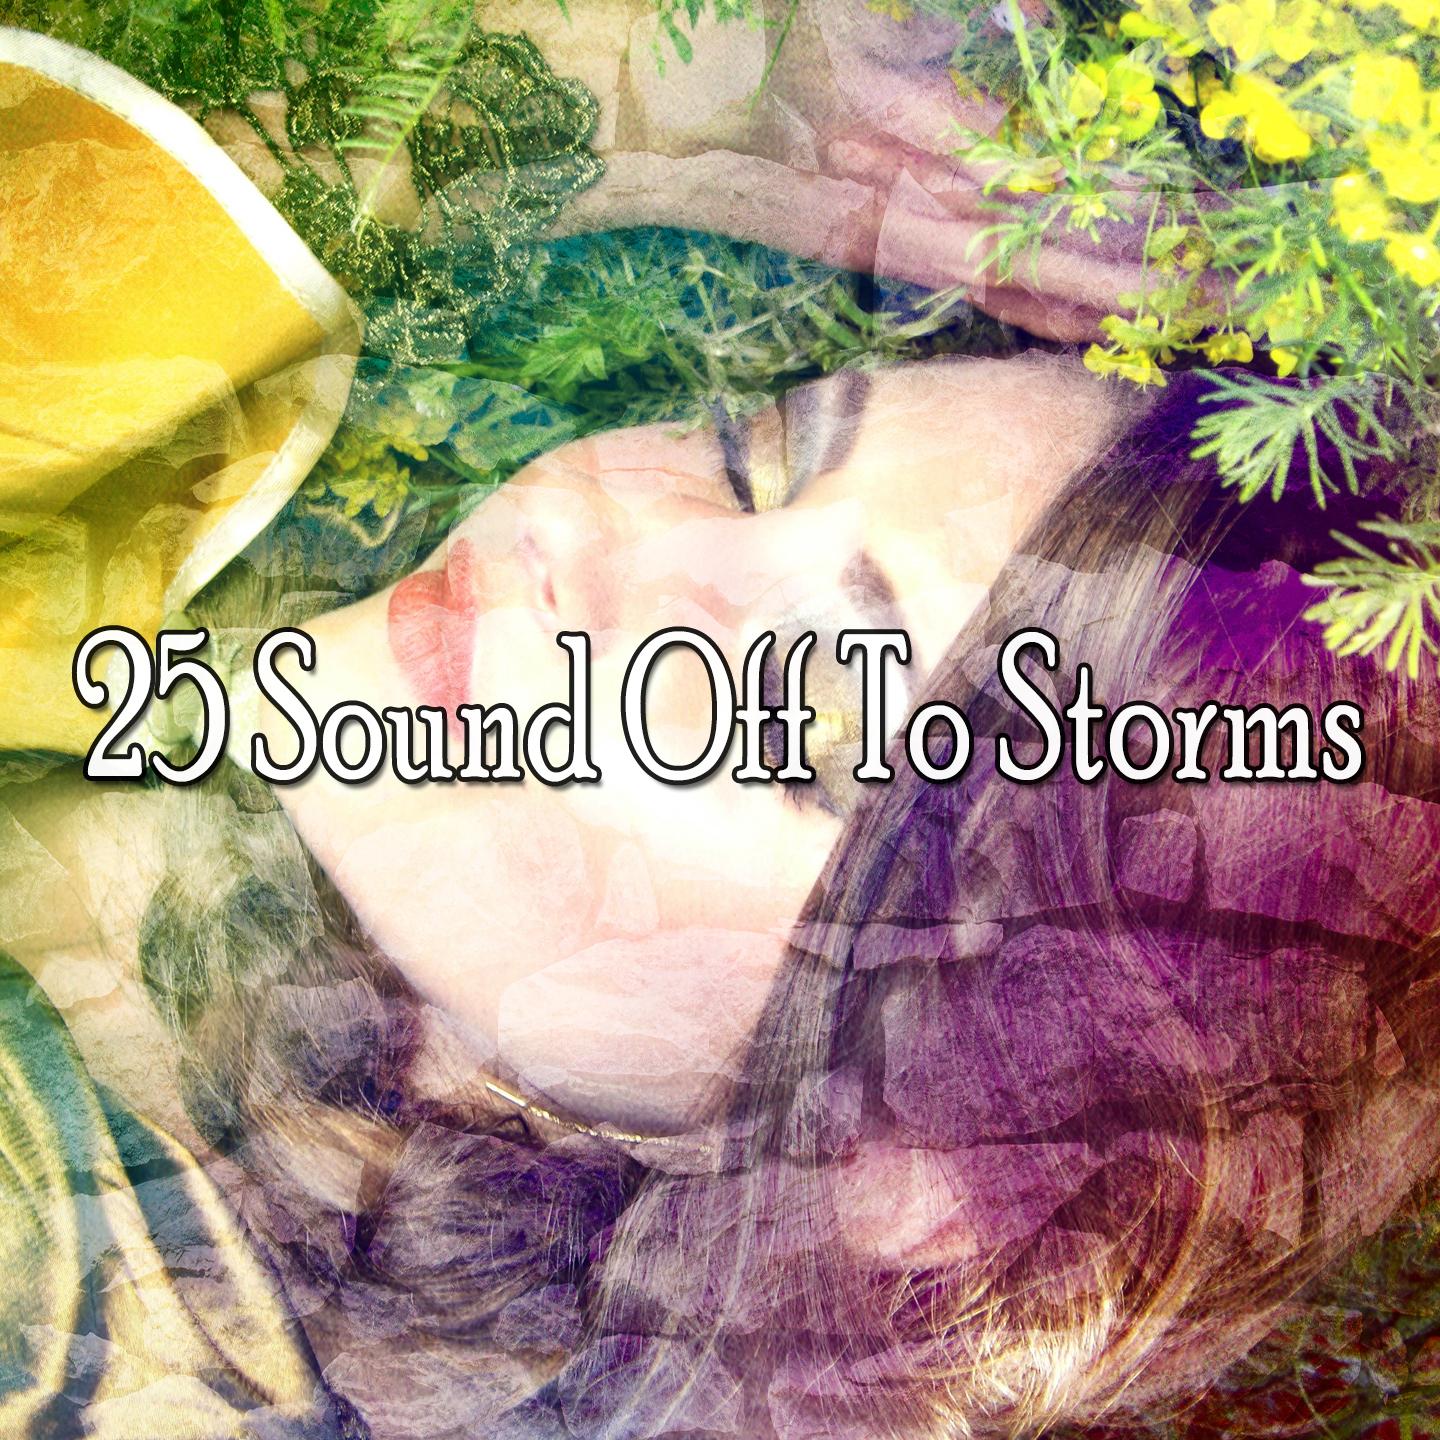 25 Sound Off to Storms